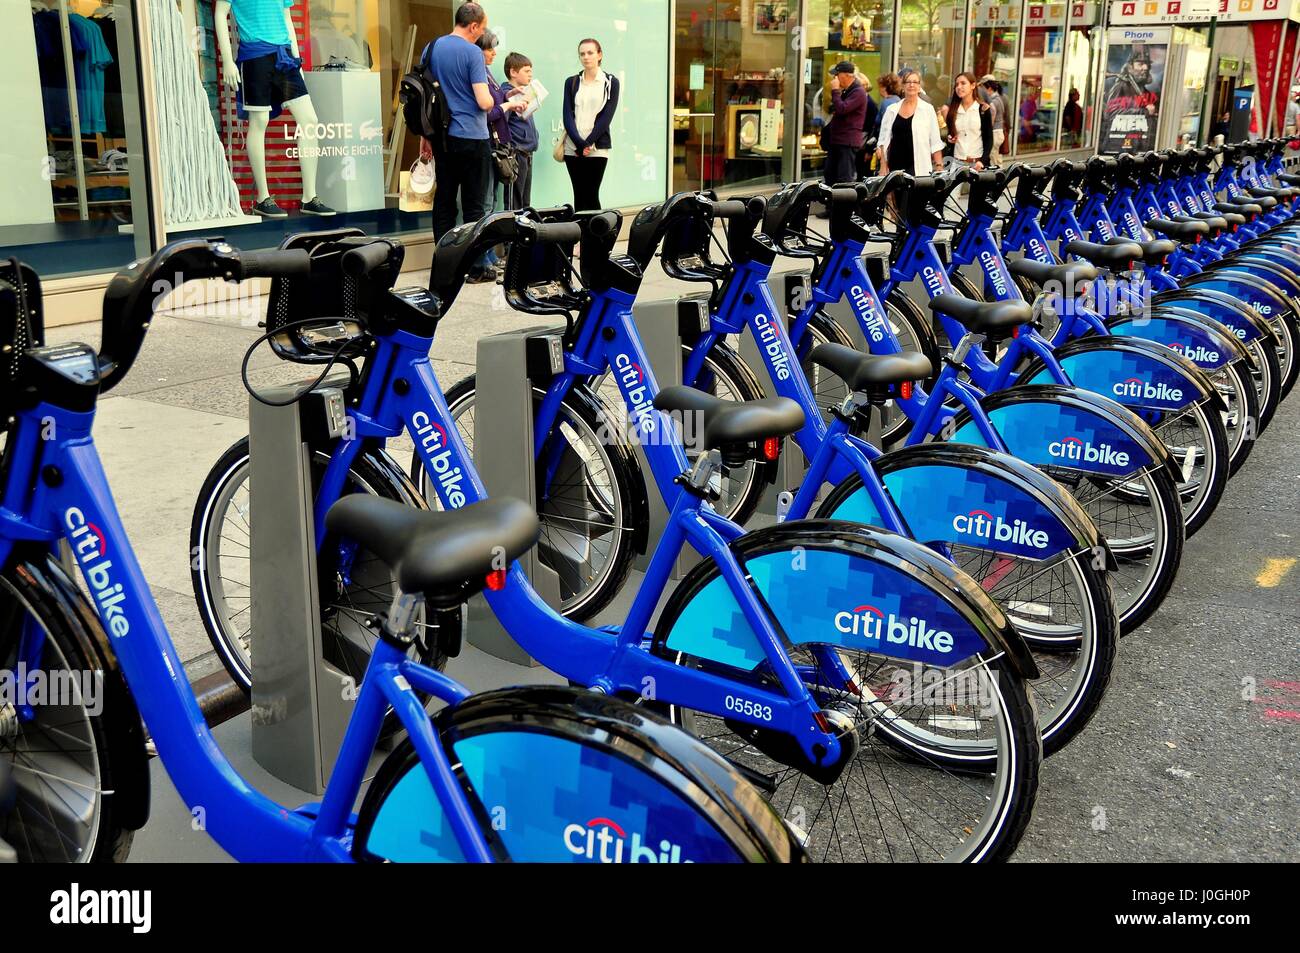 New York, NY - May 27, 2013:  Rows of Citibike rental blue bicycles emblazoned with the Citibank logo sit at a West 49th Street docking Stock Photo